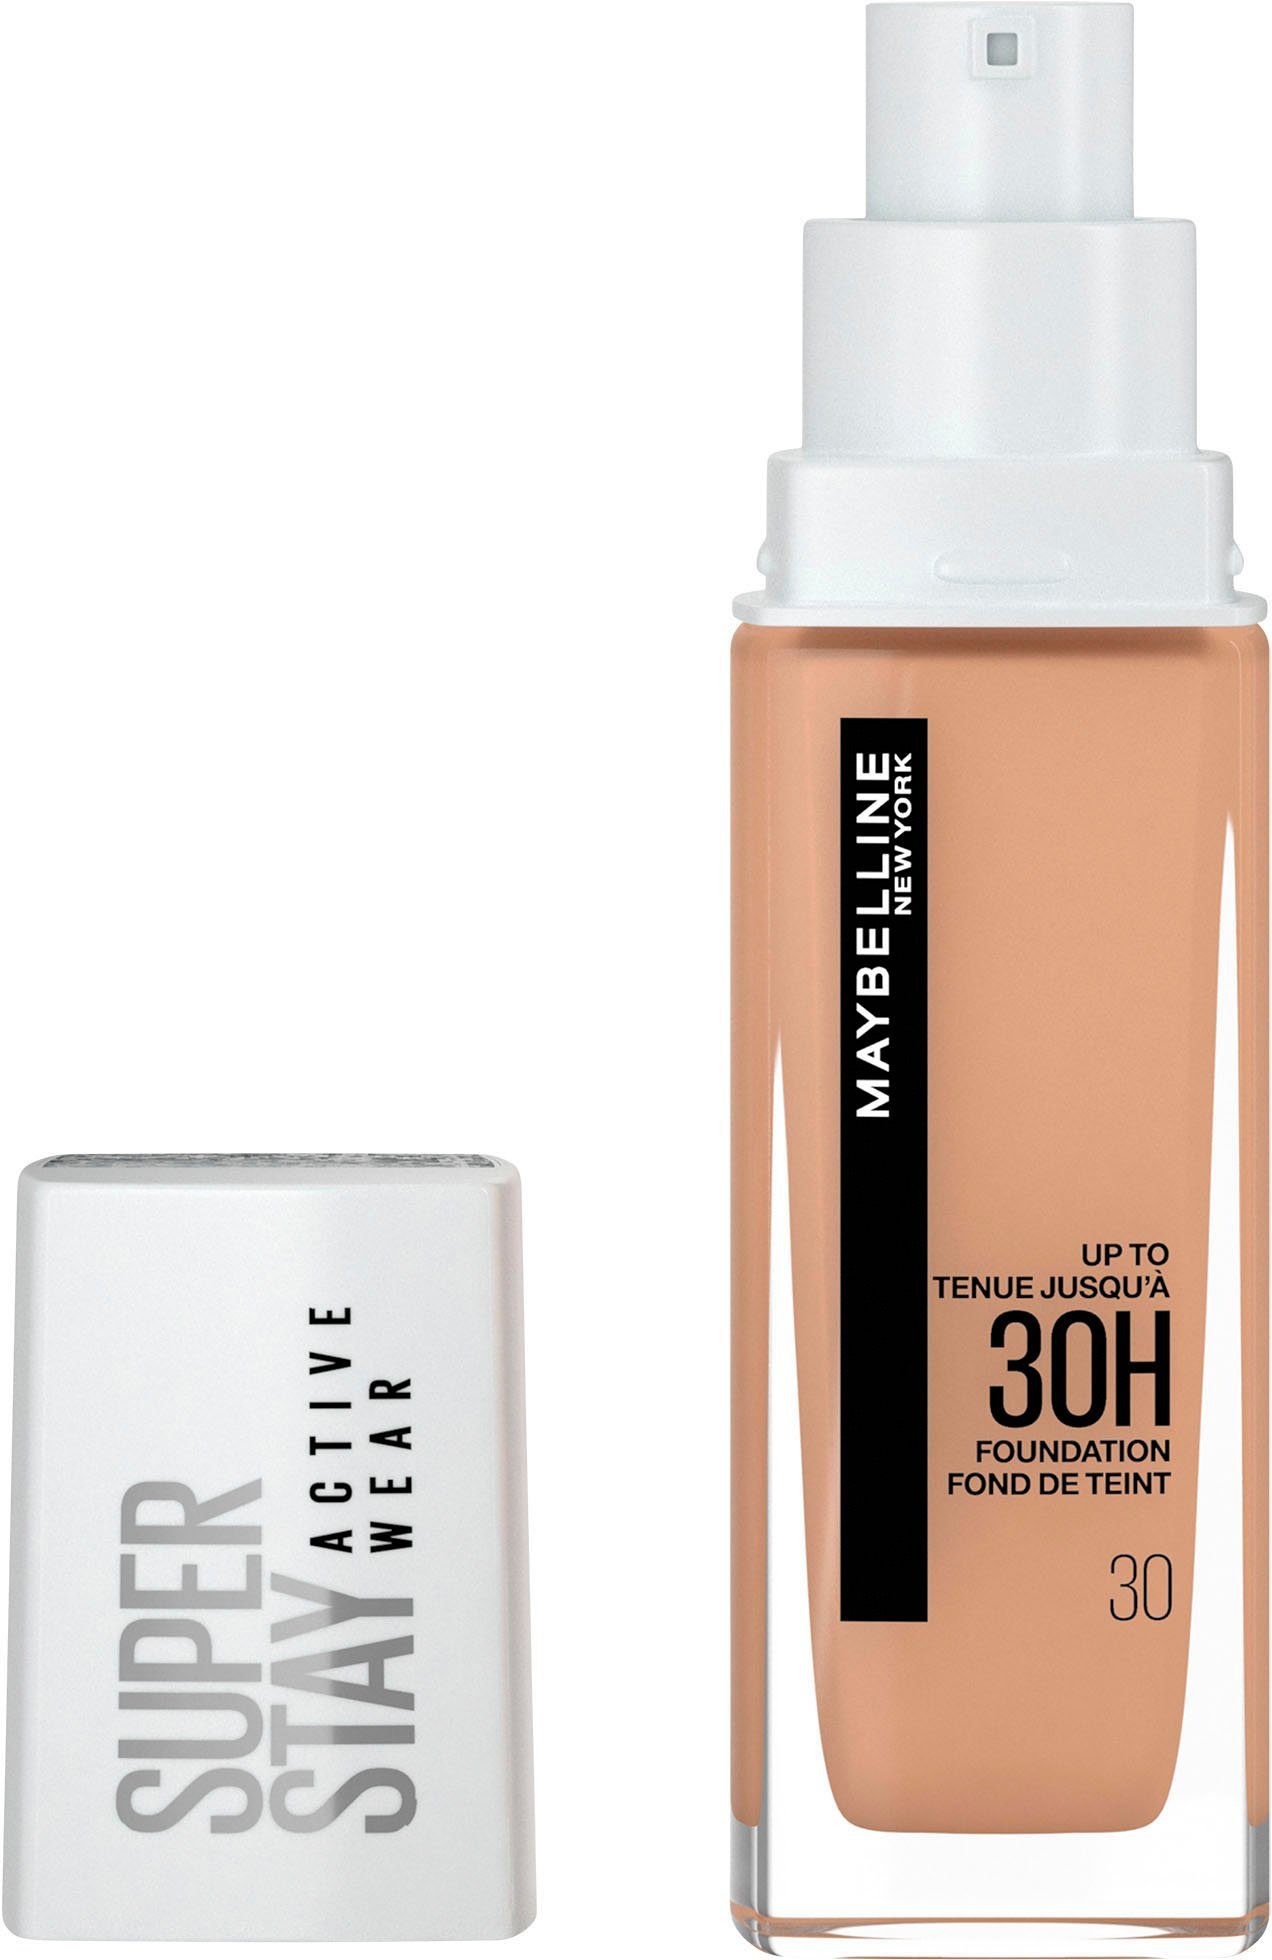 NEW Wear Super MAYBELLINE 30 YORK Foundation Sand Active Stay